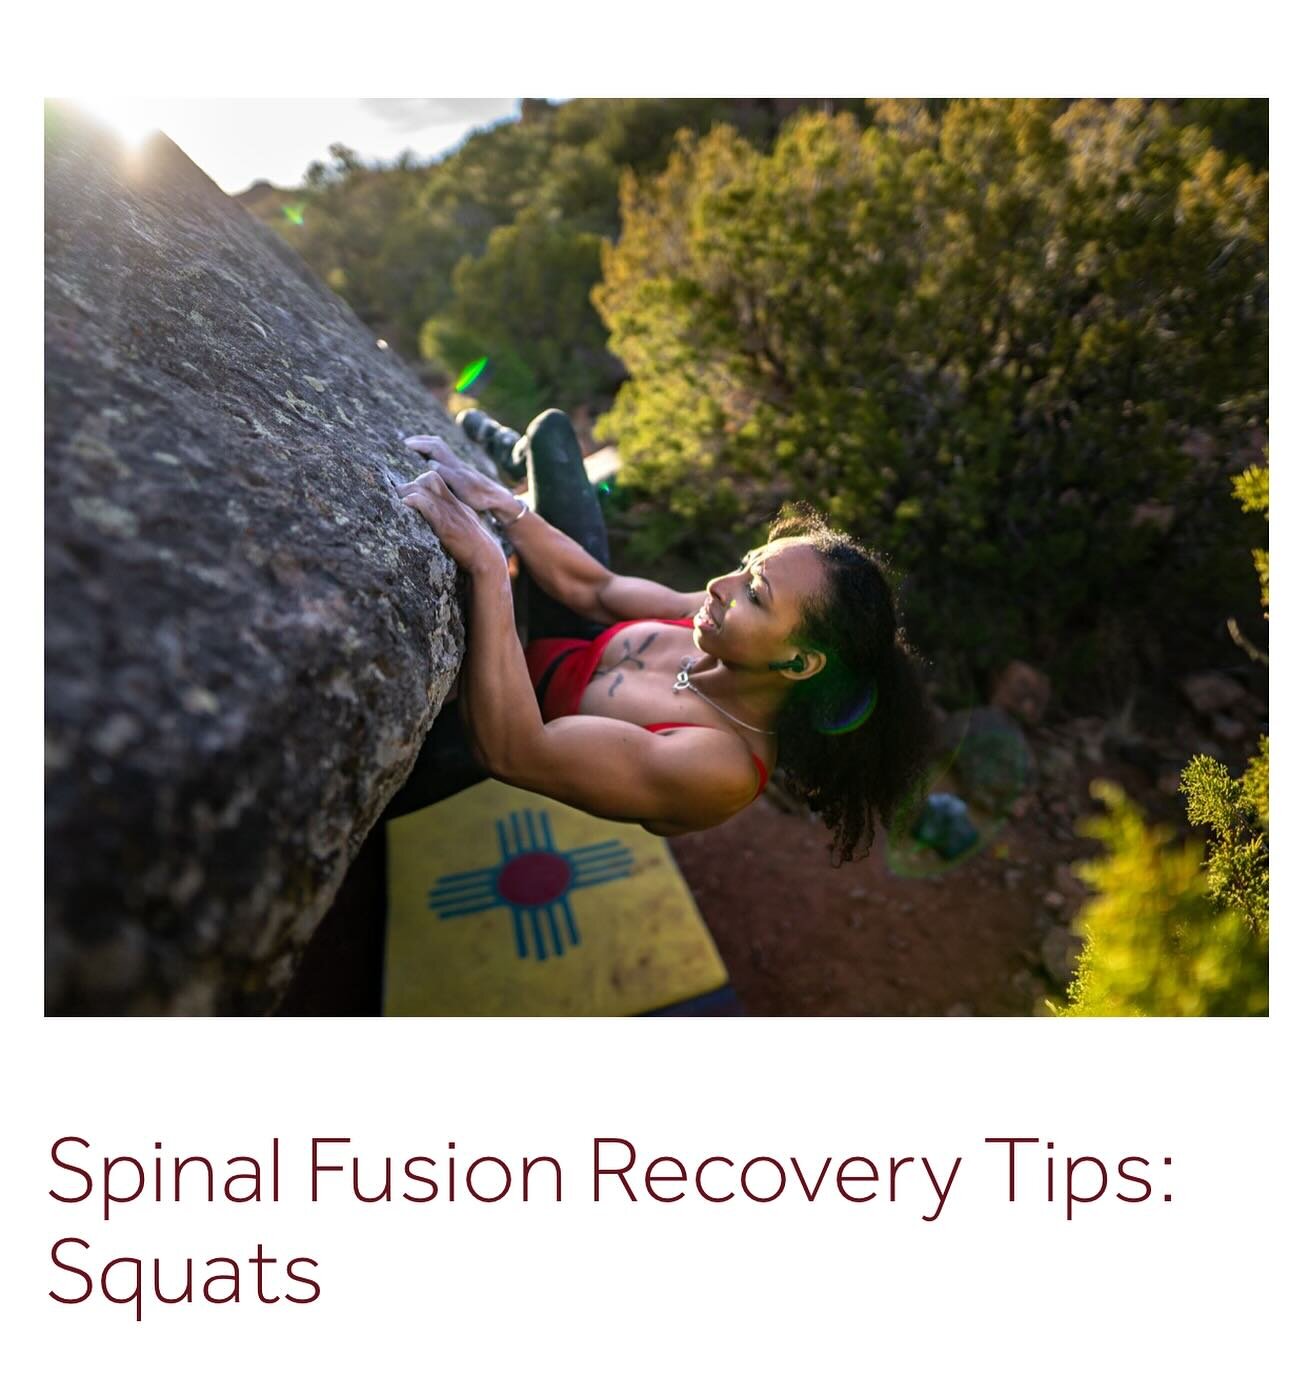 &ldquo;I&rsquo;m nearly four months post-op from lower back spinal fusion surgery. Sneezing stills hurt a ton, but I&rsquo;ve started climbing again and taking small falls. And of course, I&rsquo;m still on that rehab train!! One of the best exercise